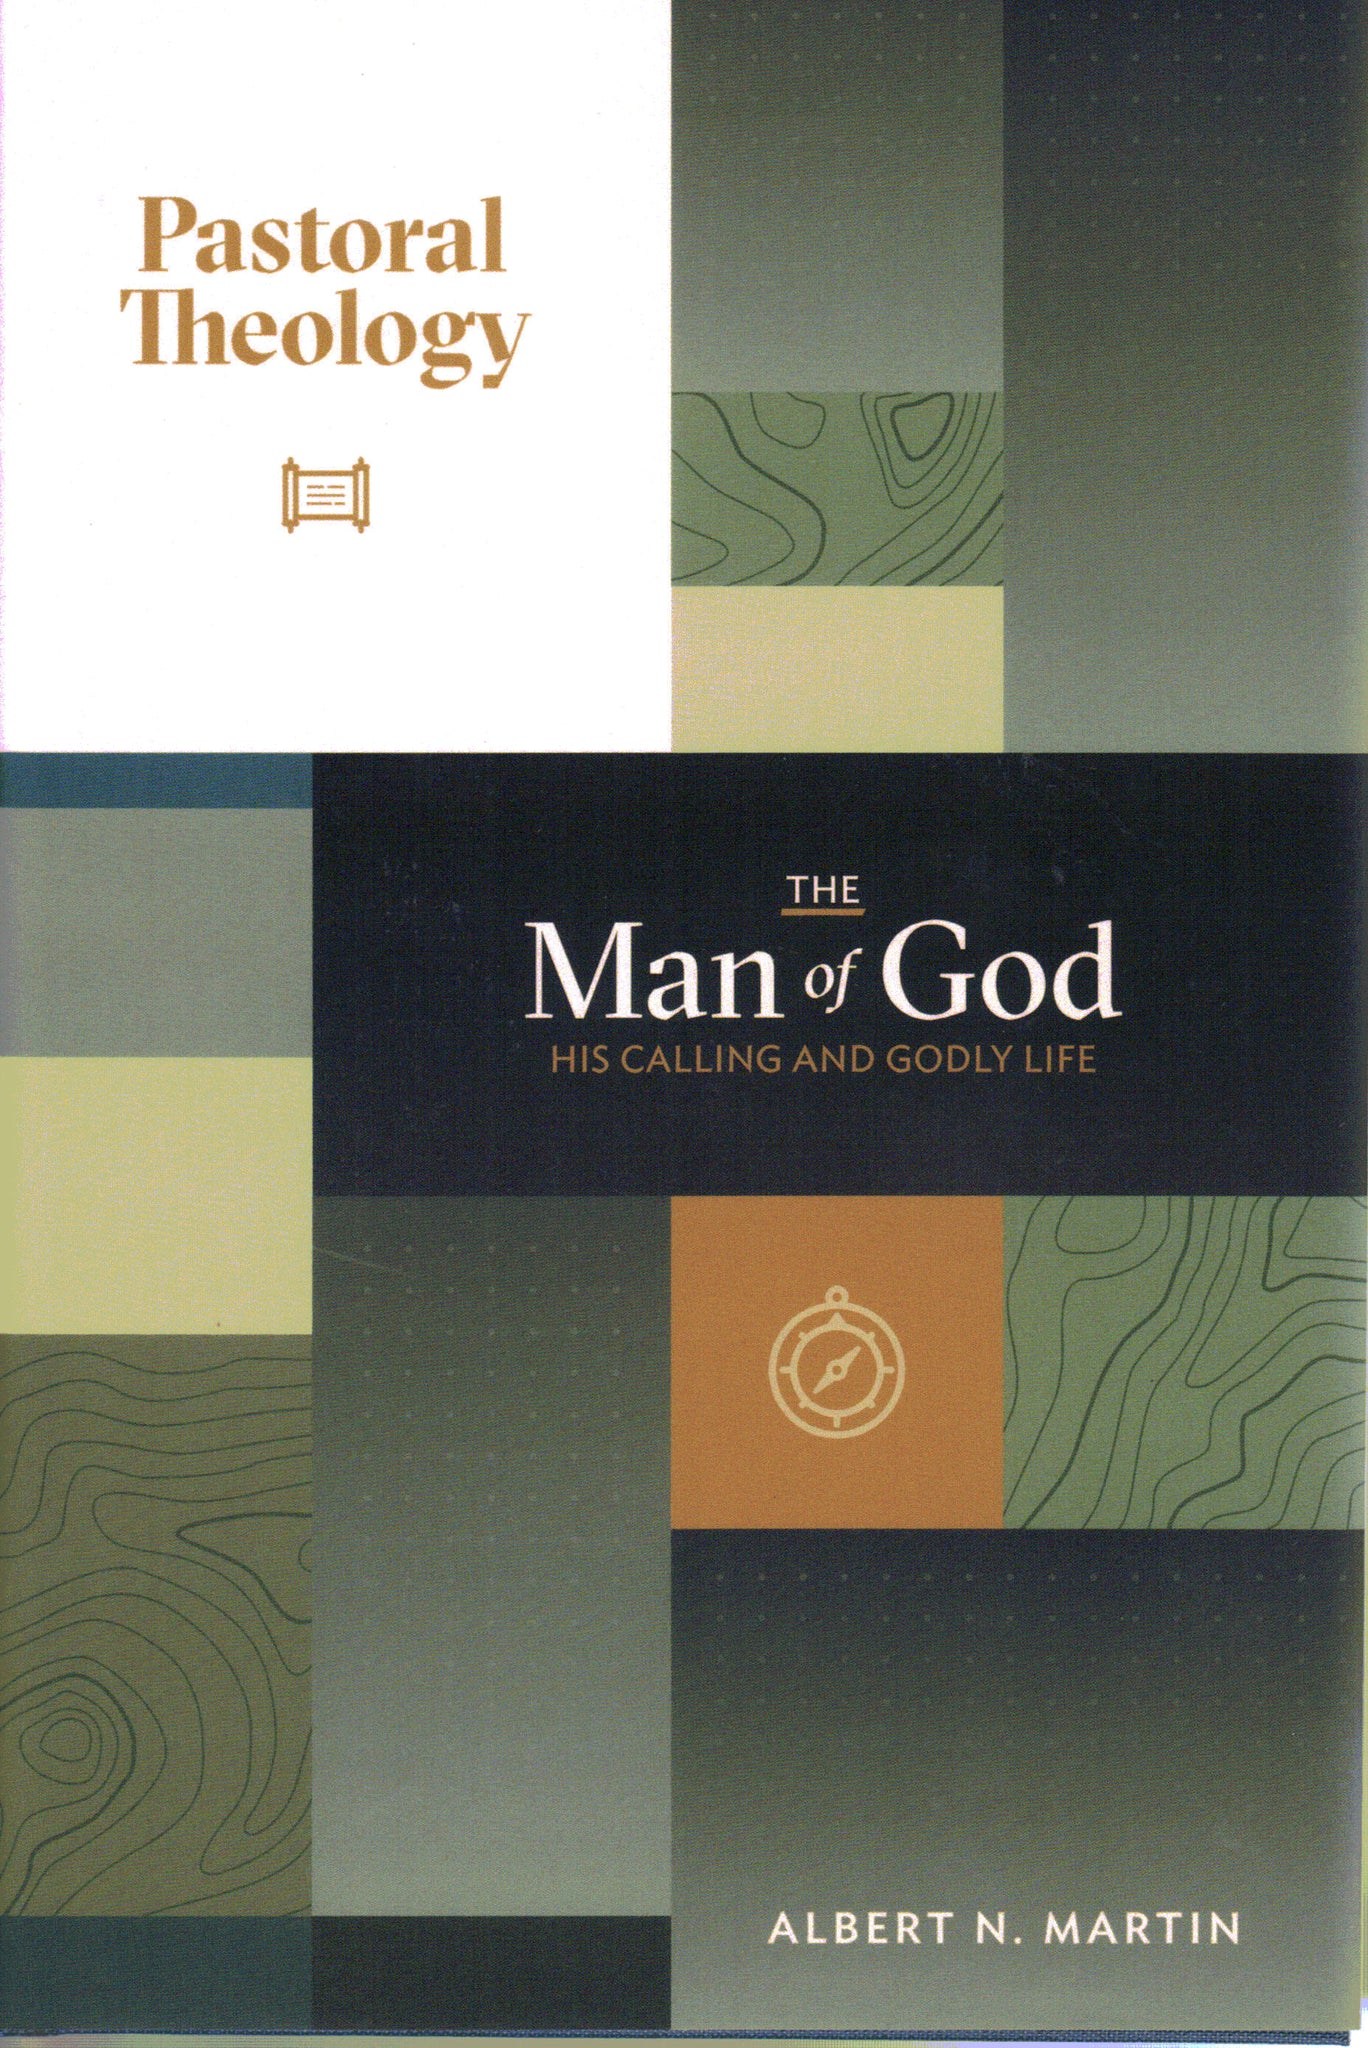 Pastoral Theology Volume 1 - The Man of God: His Calling and Godly Life